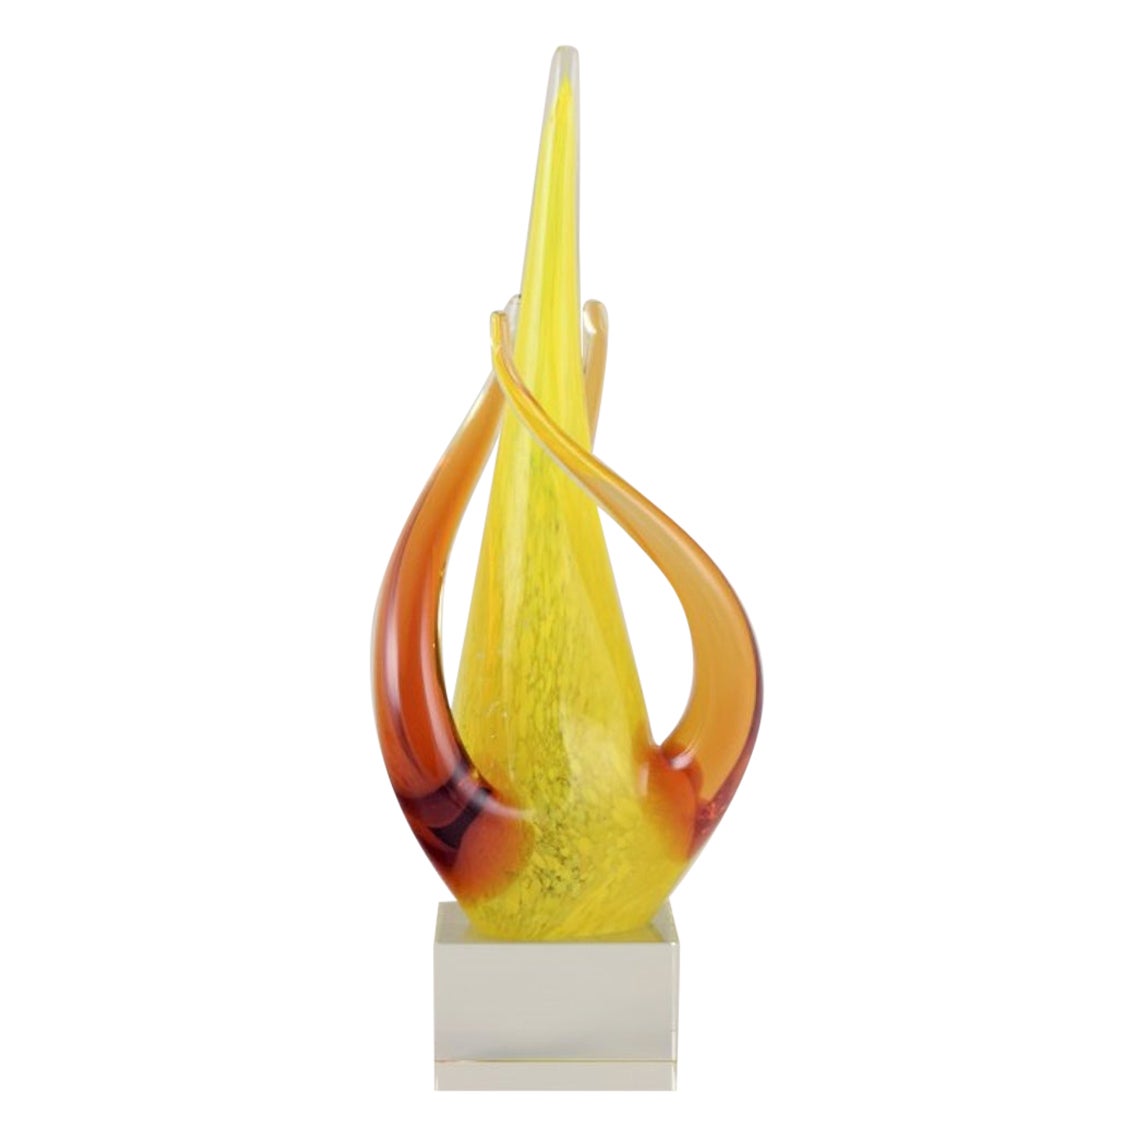 Swedish glass artist. Large sculpture in art glass. Yellow and amber decoration.